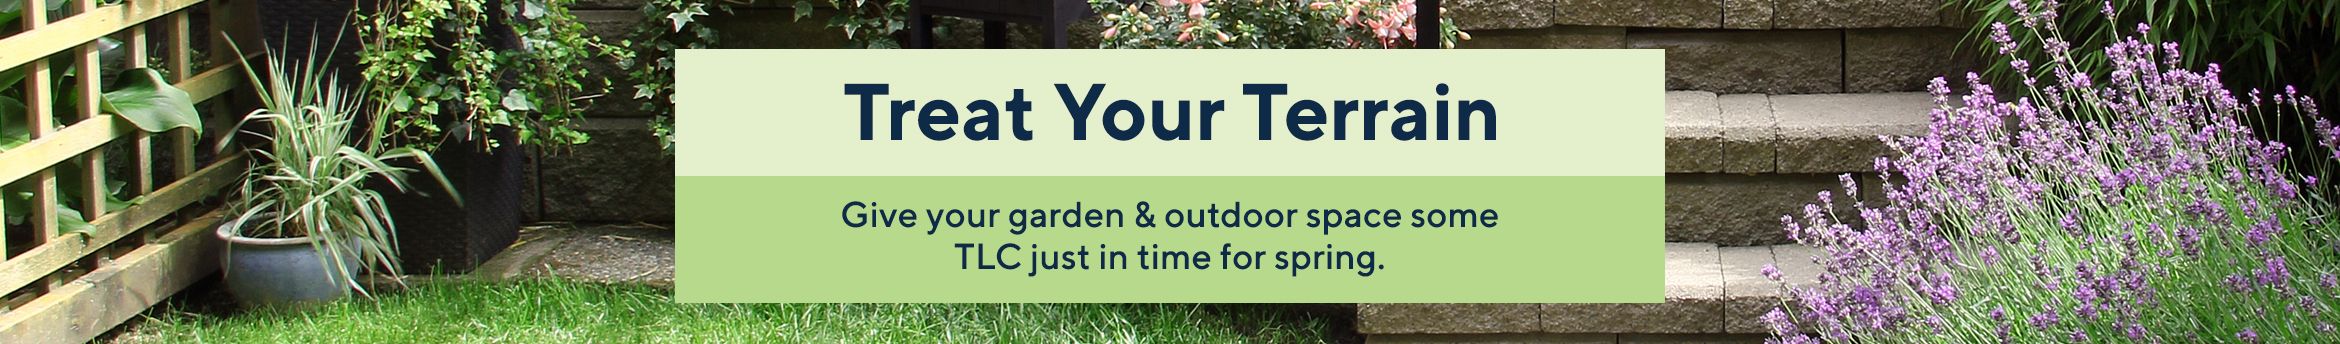 Treat Your Terrain Give your garden & outdoor space some TLC just in time for spring.